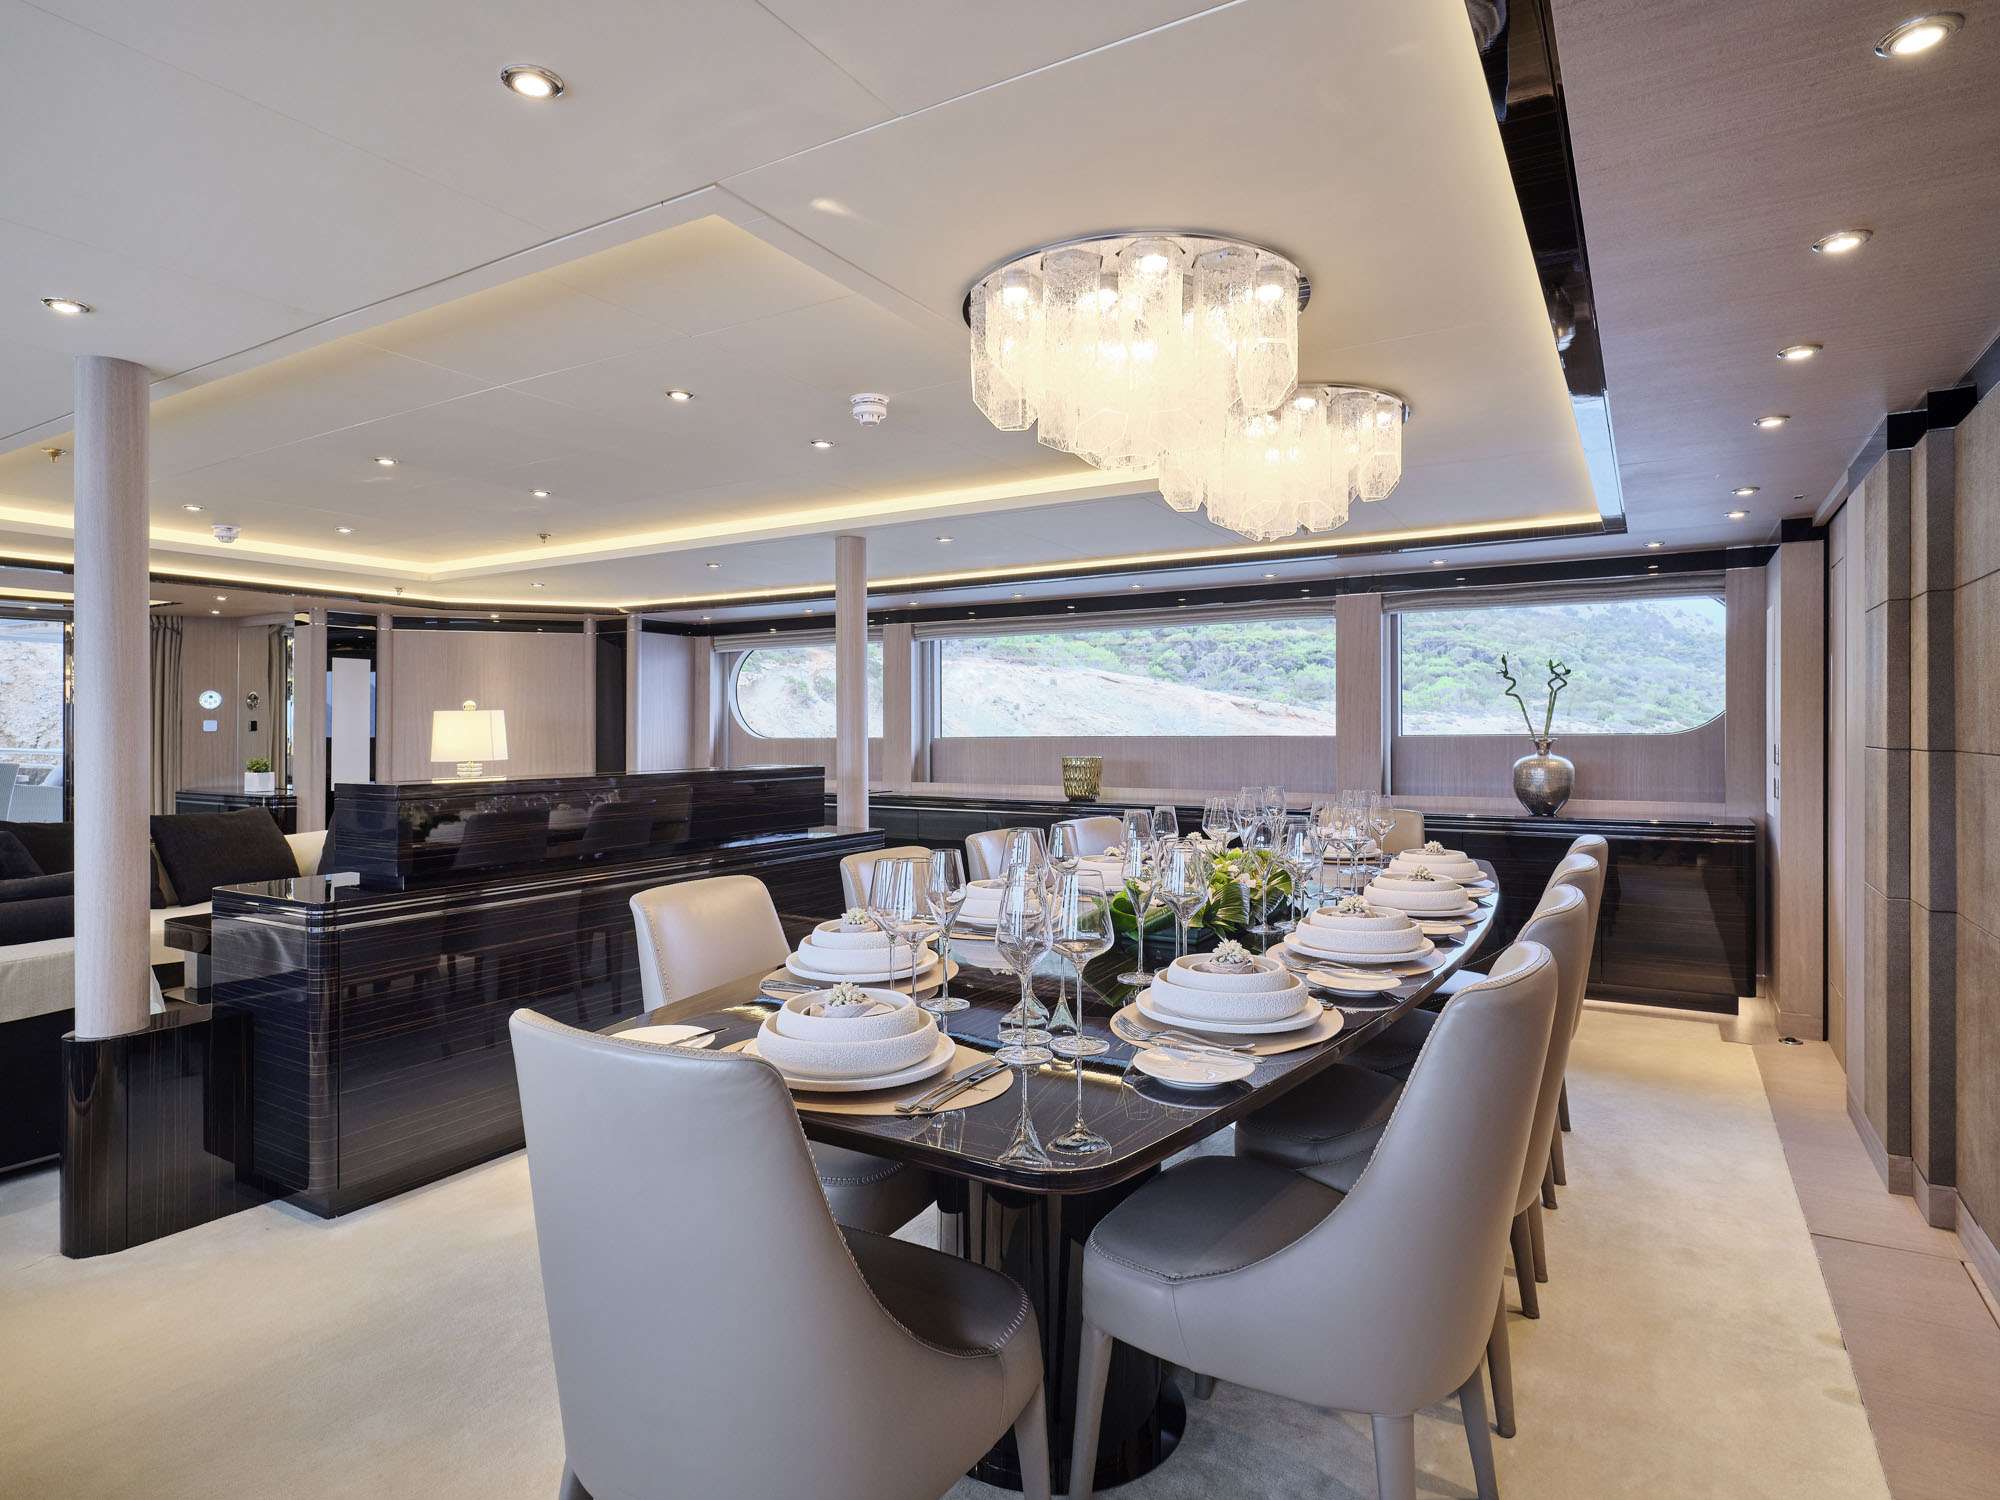 Motor Yacht 'INVADER' Main Deck Dining, 12 PAX, 12 Crew, 164.00 Ft, 50.00 Meters, Built 1999, Codecasa, Refit Year 2019